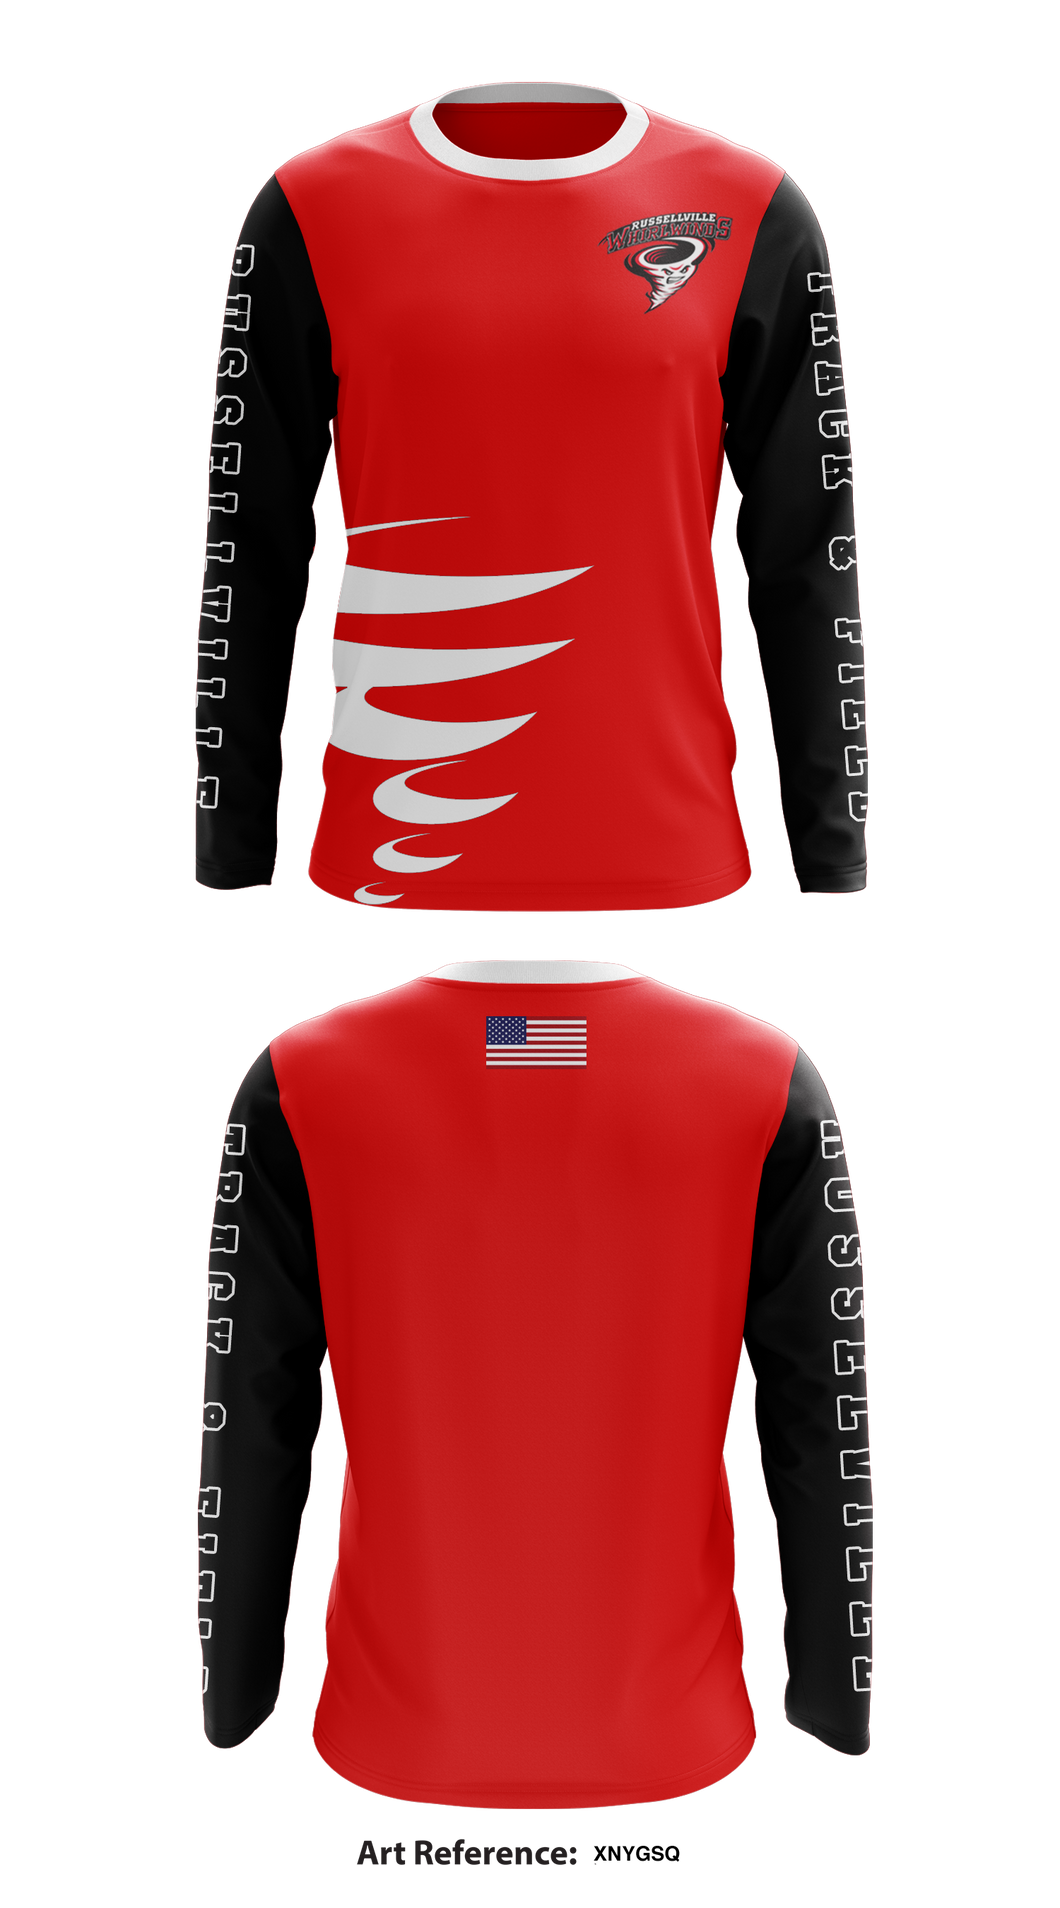 Long Sleeve Performance Shirt, Russellville track and field, Track & Field, Teamtime, Team time, sublimation, custom sports apparel, team uniforms, spirit wear, spiritwear, sports uniforms, custom shirts, team store, custom team store, fundraiser sports, apparel fundraiser